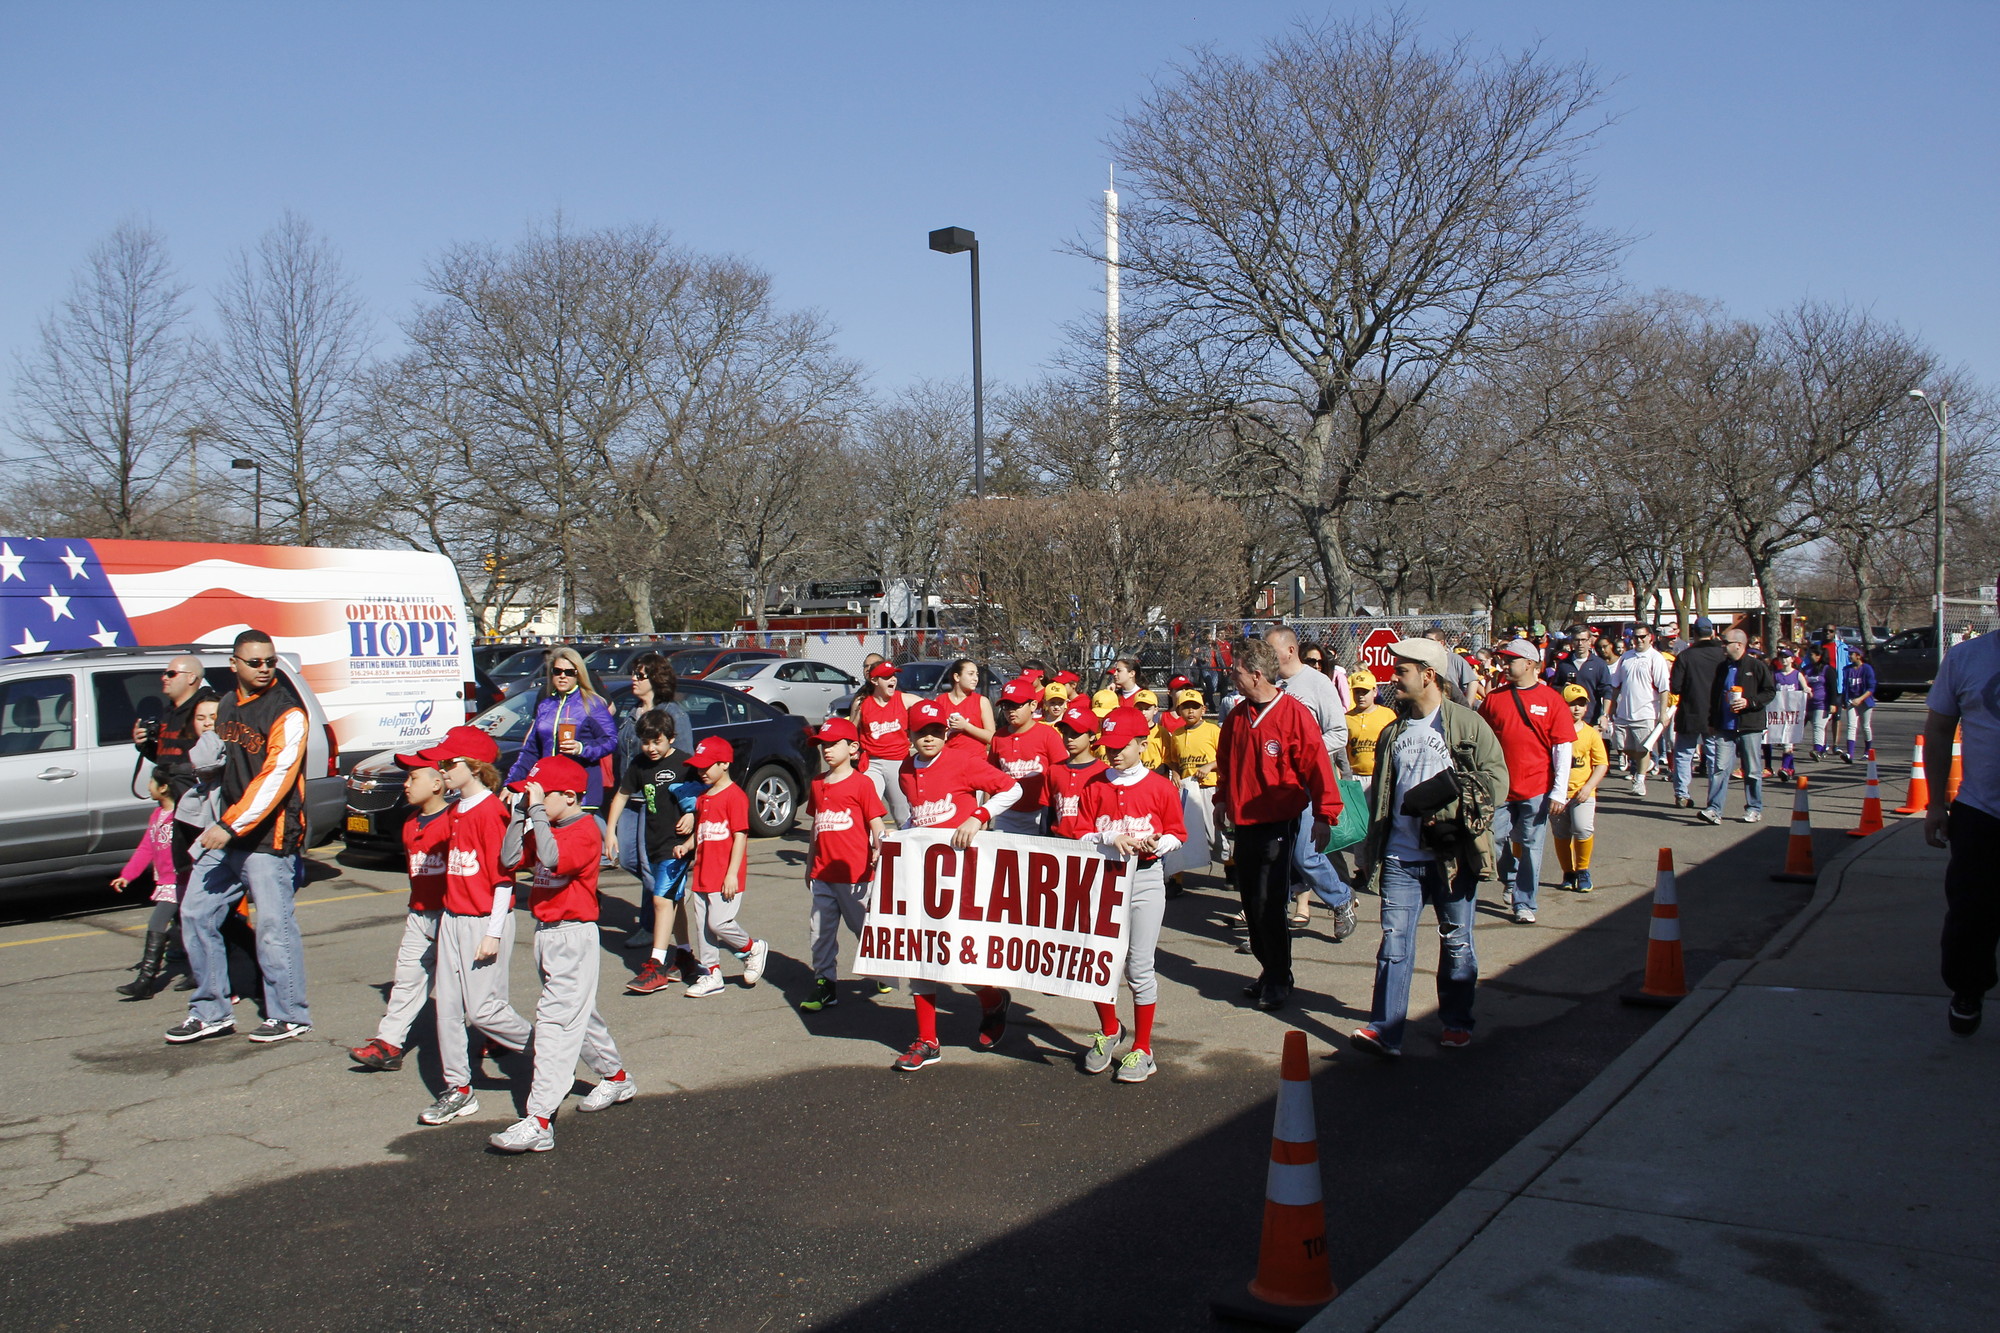 The Central Nassau Little League parade marched down Carman Avenue to Salisbury fields last Saturday where the opening day ceremony was held.